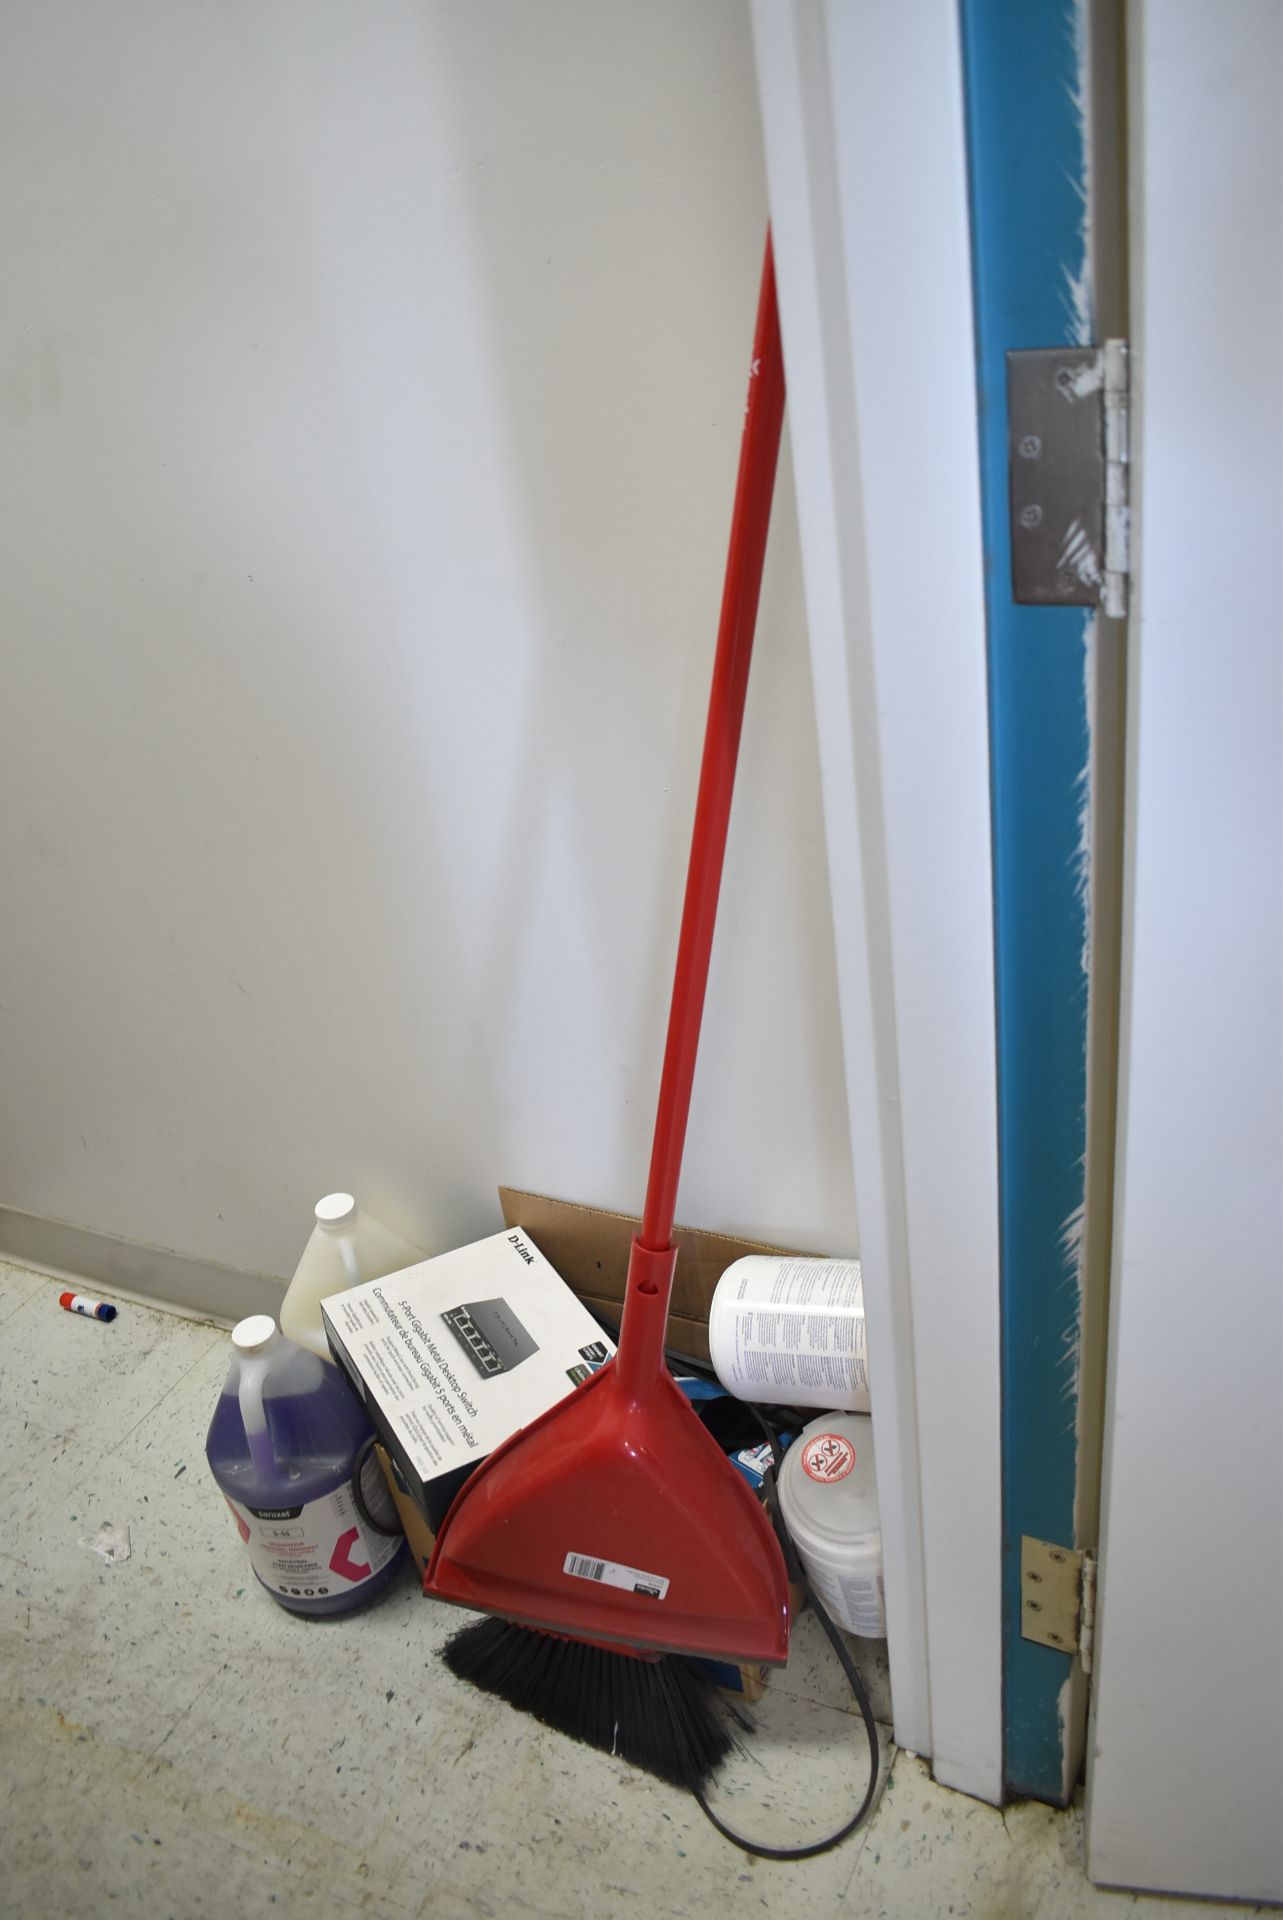 LOT/ CONTENTS OF SUPPLY CLOSET - INCLUIDNG OFFICE SUPPLIES, CLEANING SUPPLIES, SHELVES - Image 6 of 6